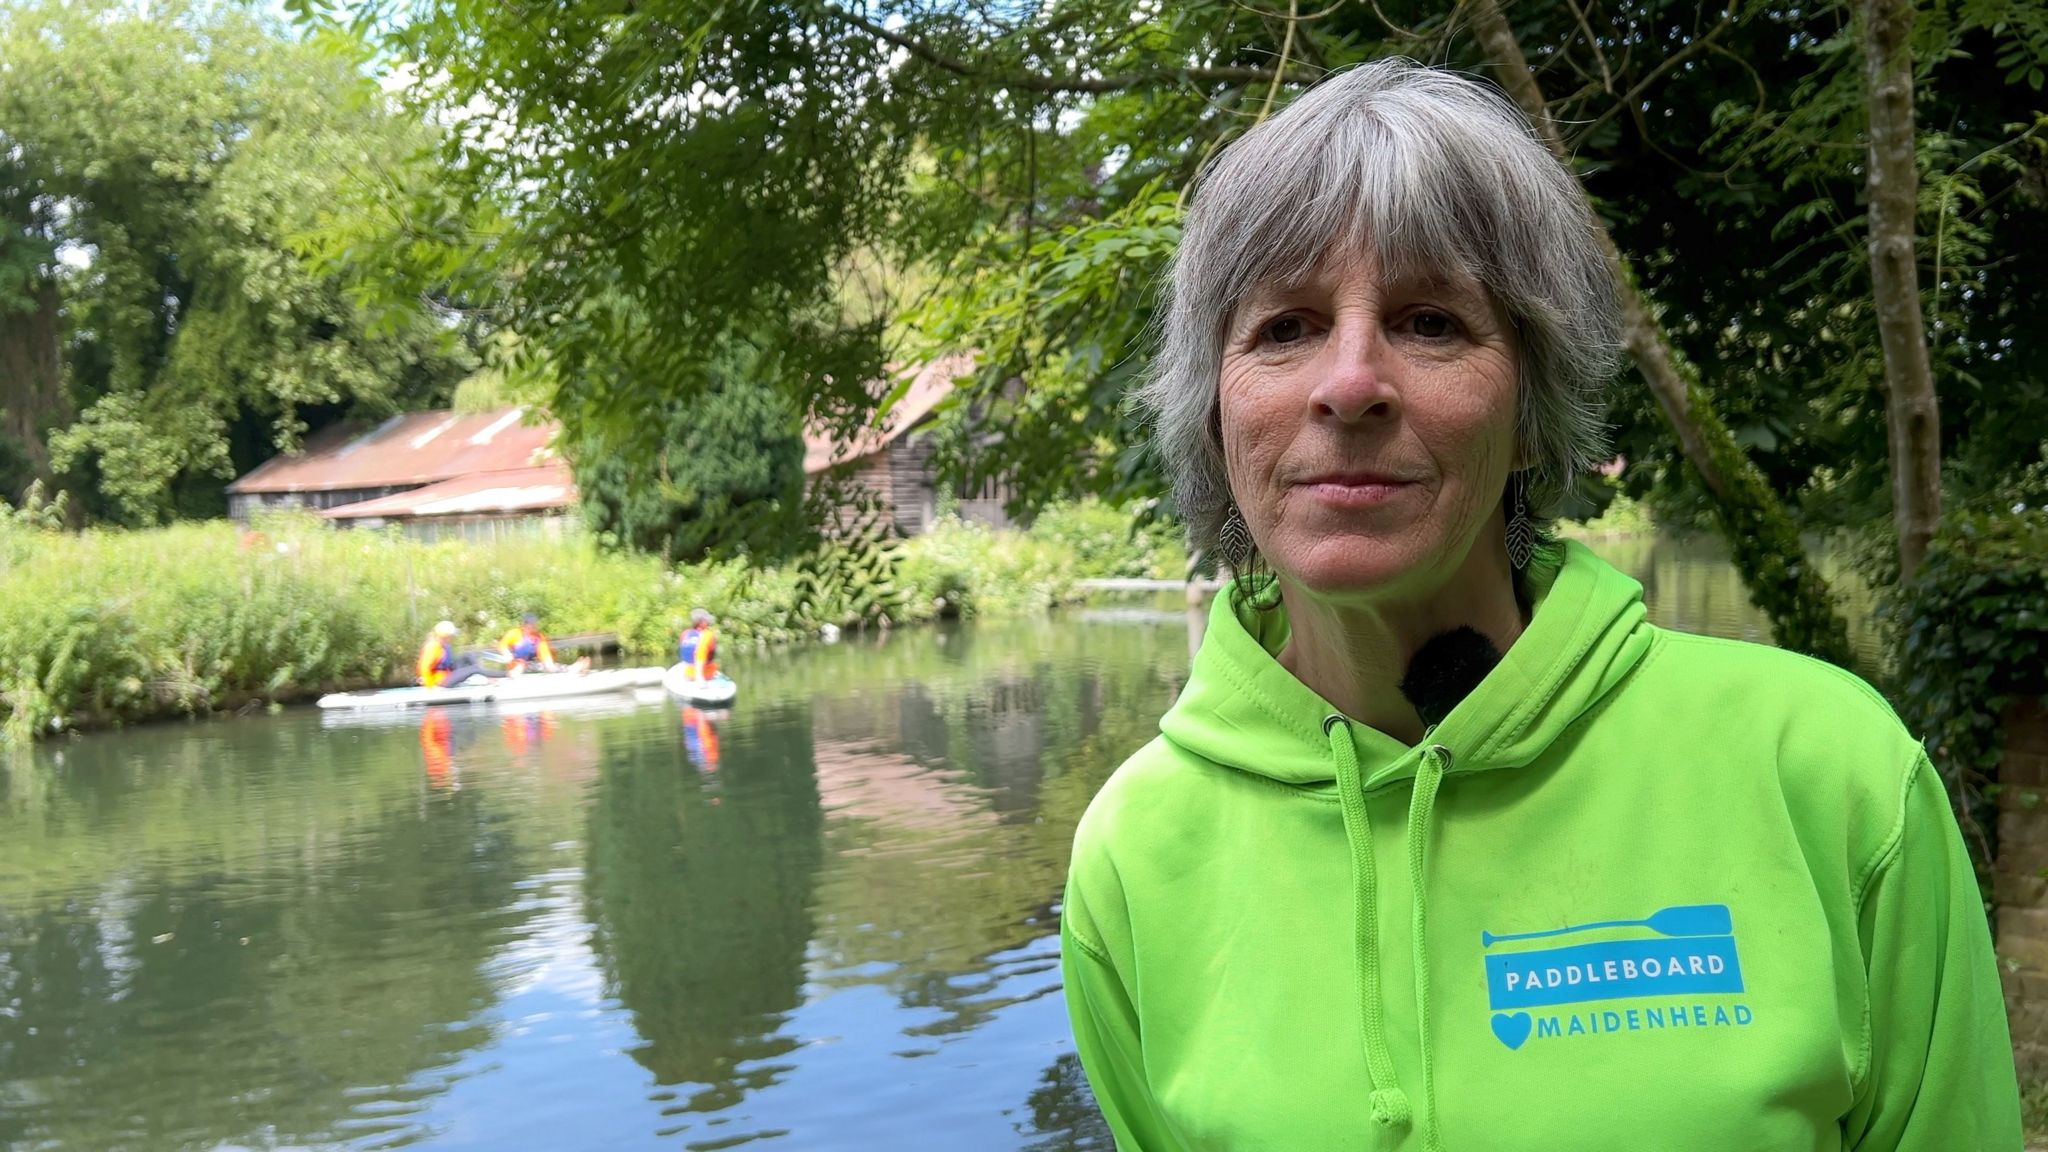 Tara Crist stands on the banks of the Thames with paddle-boarders from the school she runs on the river behind her